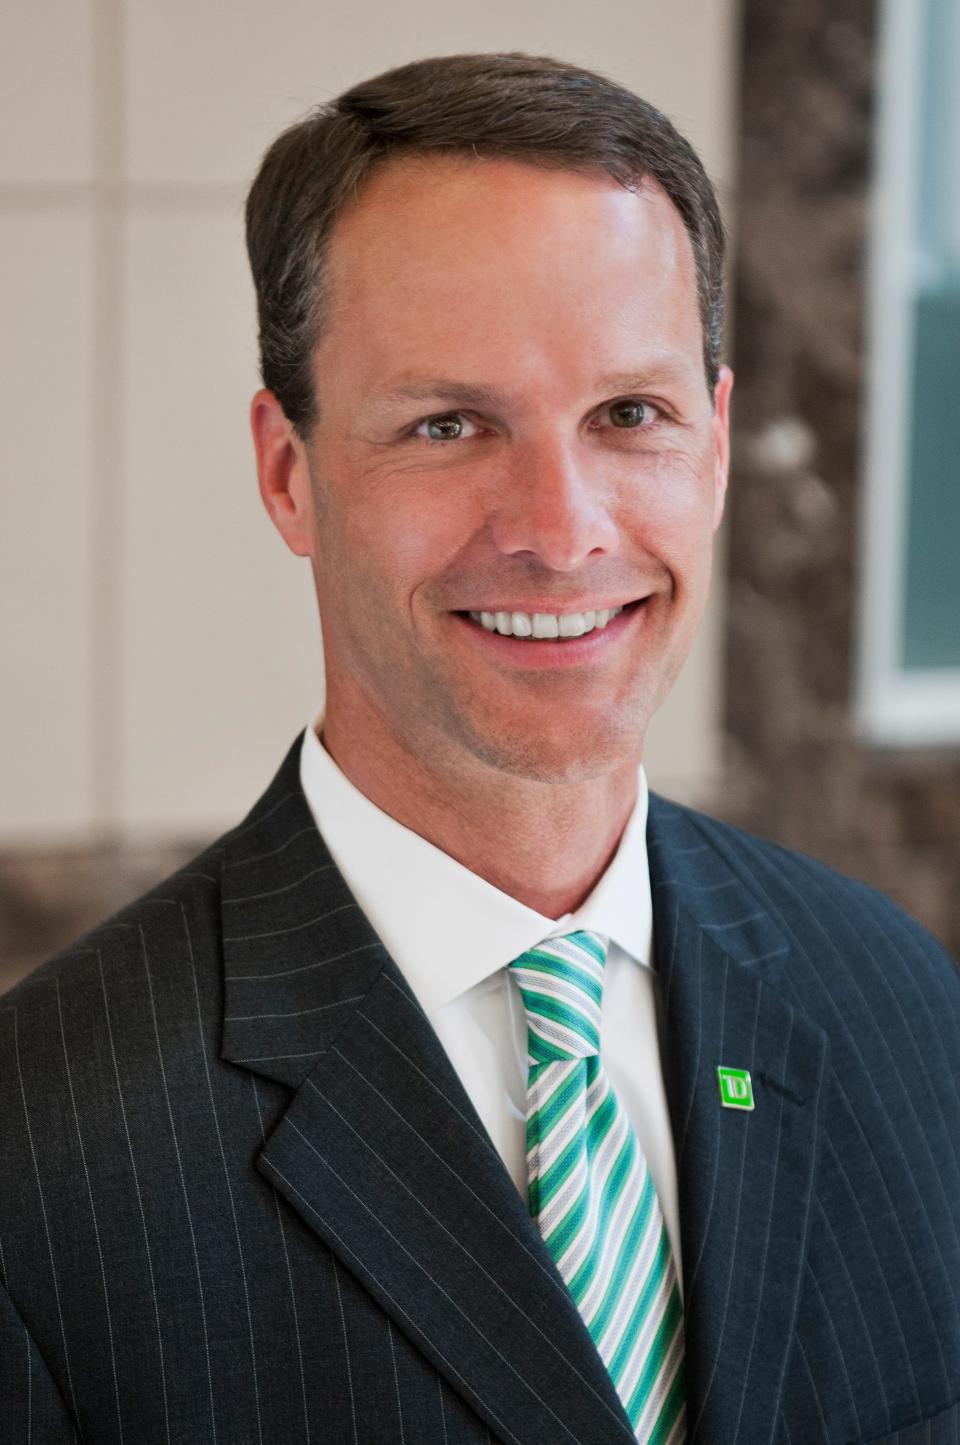 David Lominack, South Carolina Market President of TD Bank, is a co-chair of the Racial Equity and Economic Mobility Commission in Greenville County.